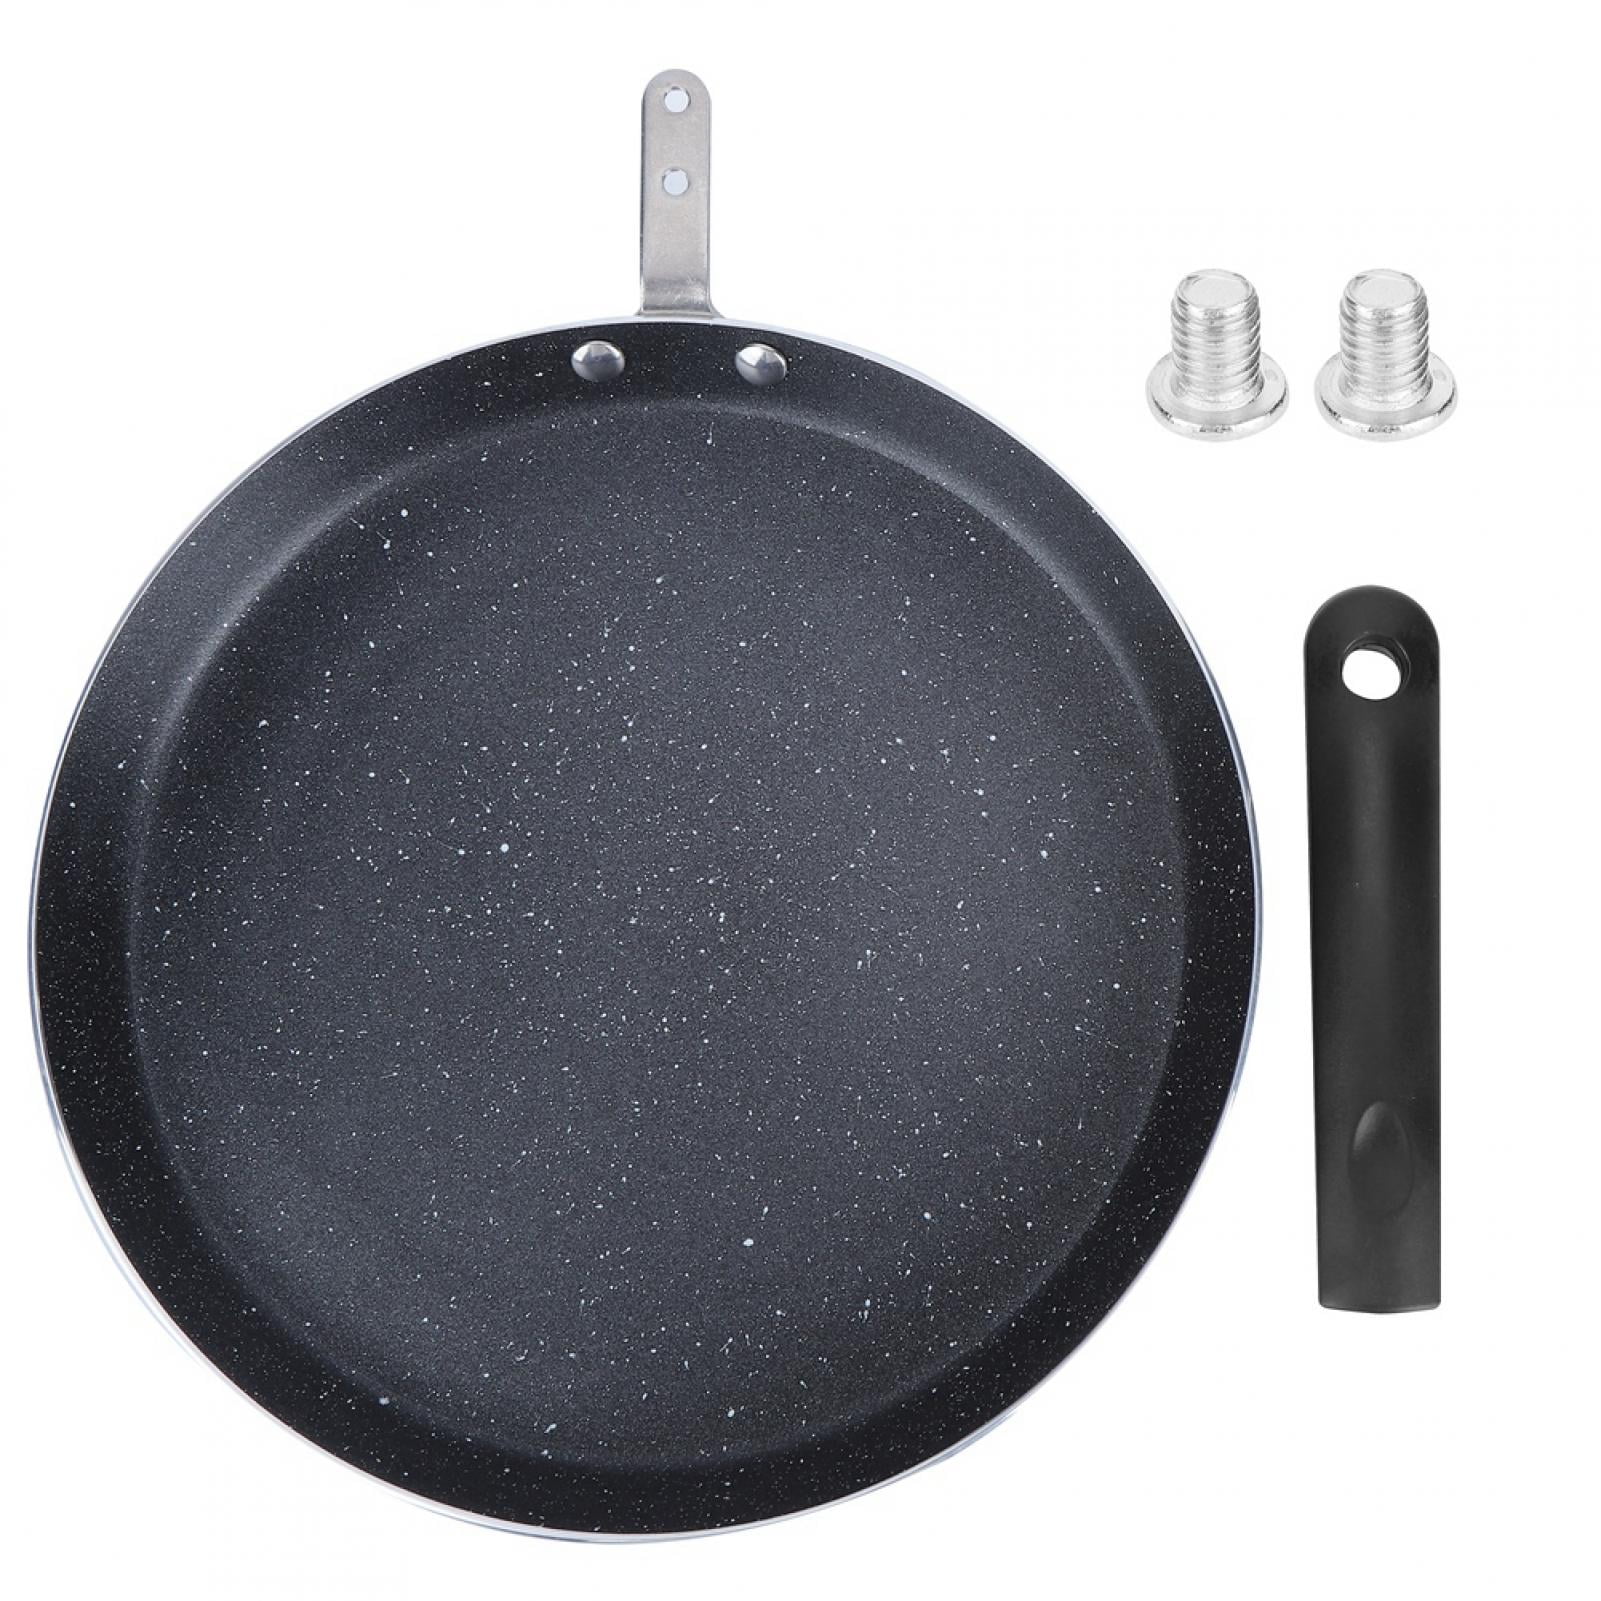 Flat Bottom Pan, Non-stick Frying Pan, Easy To Clean Durable For Home 6in  Small Size